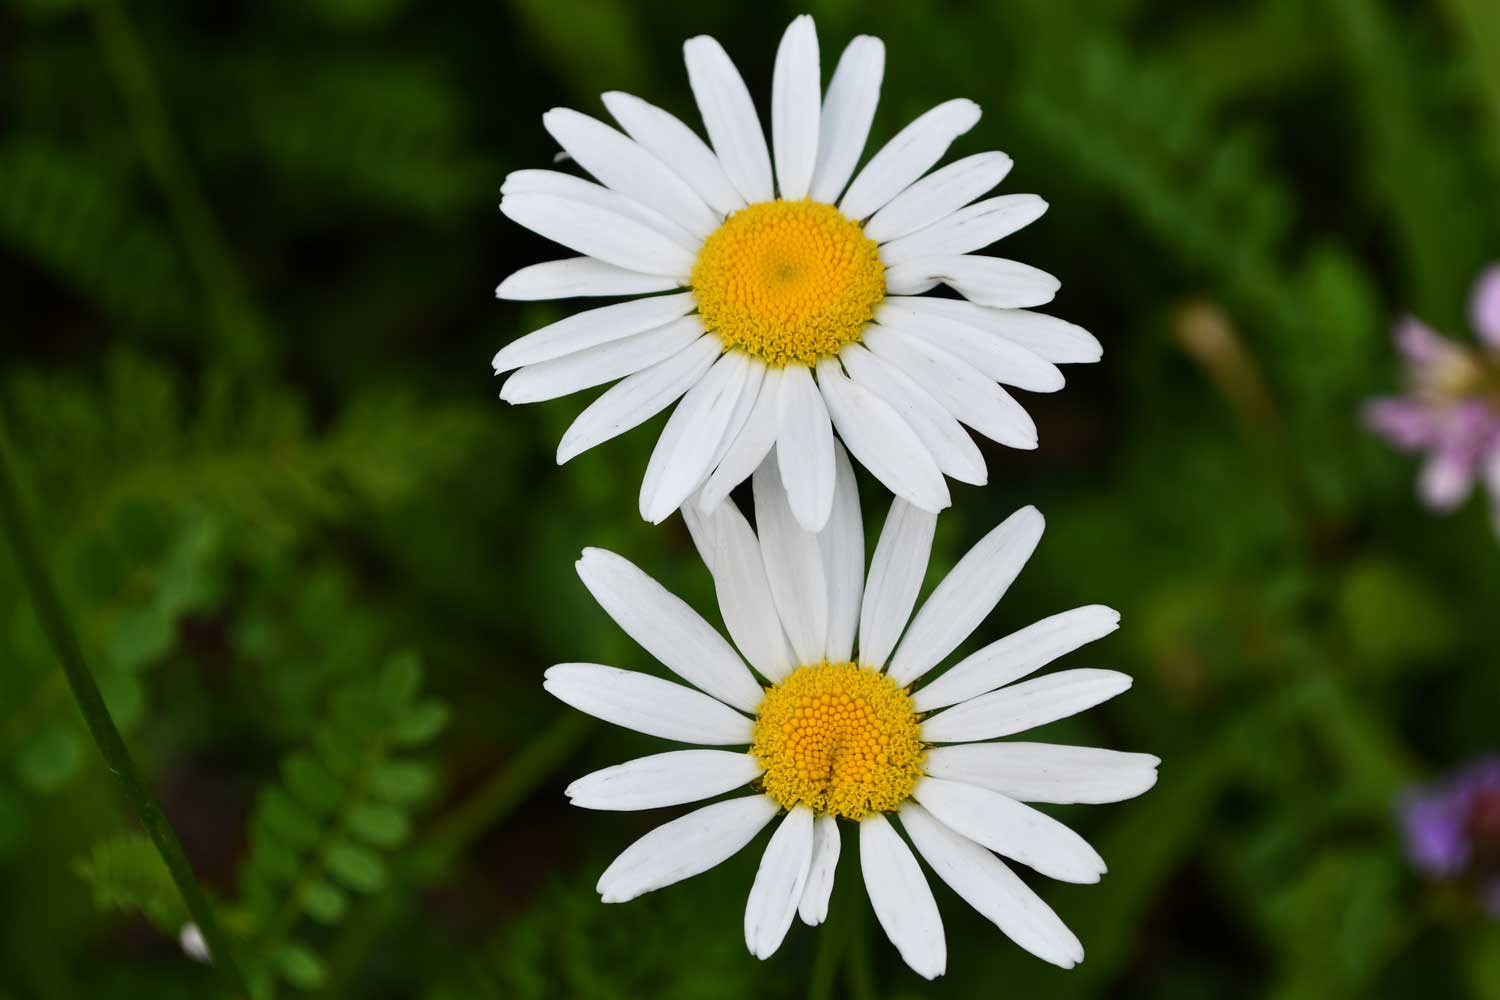 Oxeye daisy flower blooms.